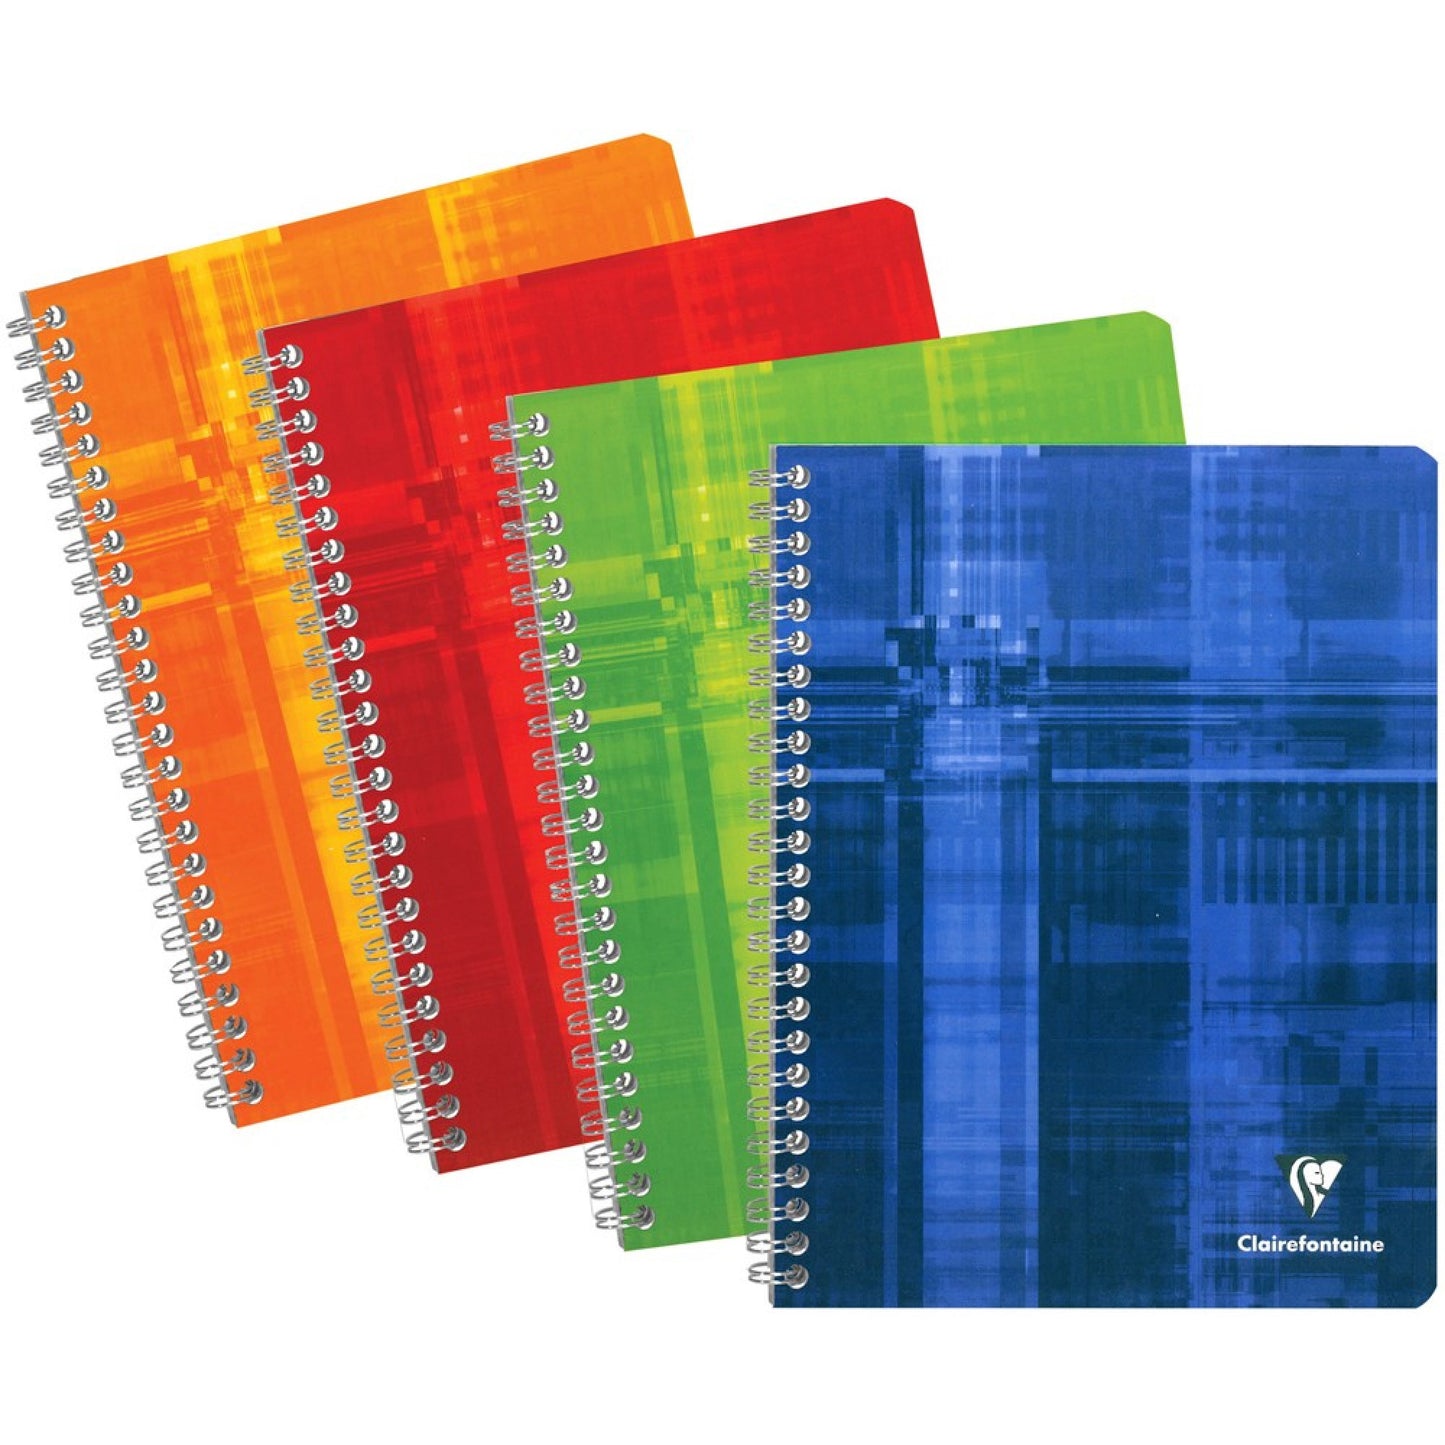 Clairefontaine #8731 Classic French Ruled Wirebound Notebook (6.75 x 8.75) (Assorted)